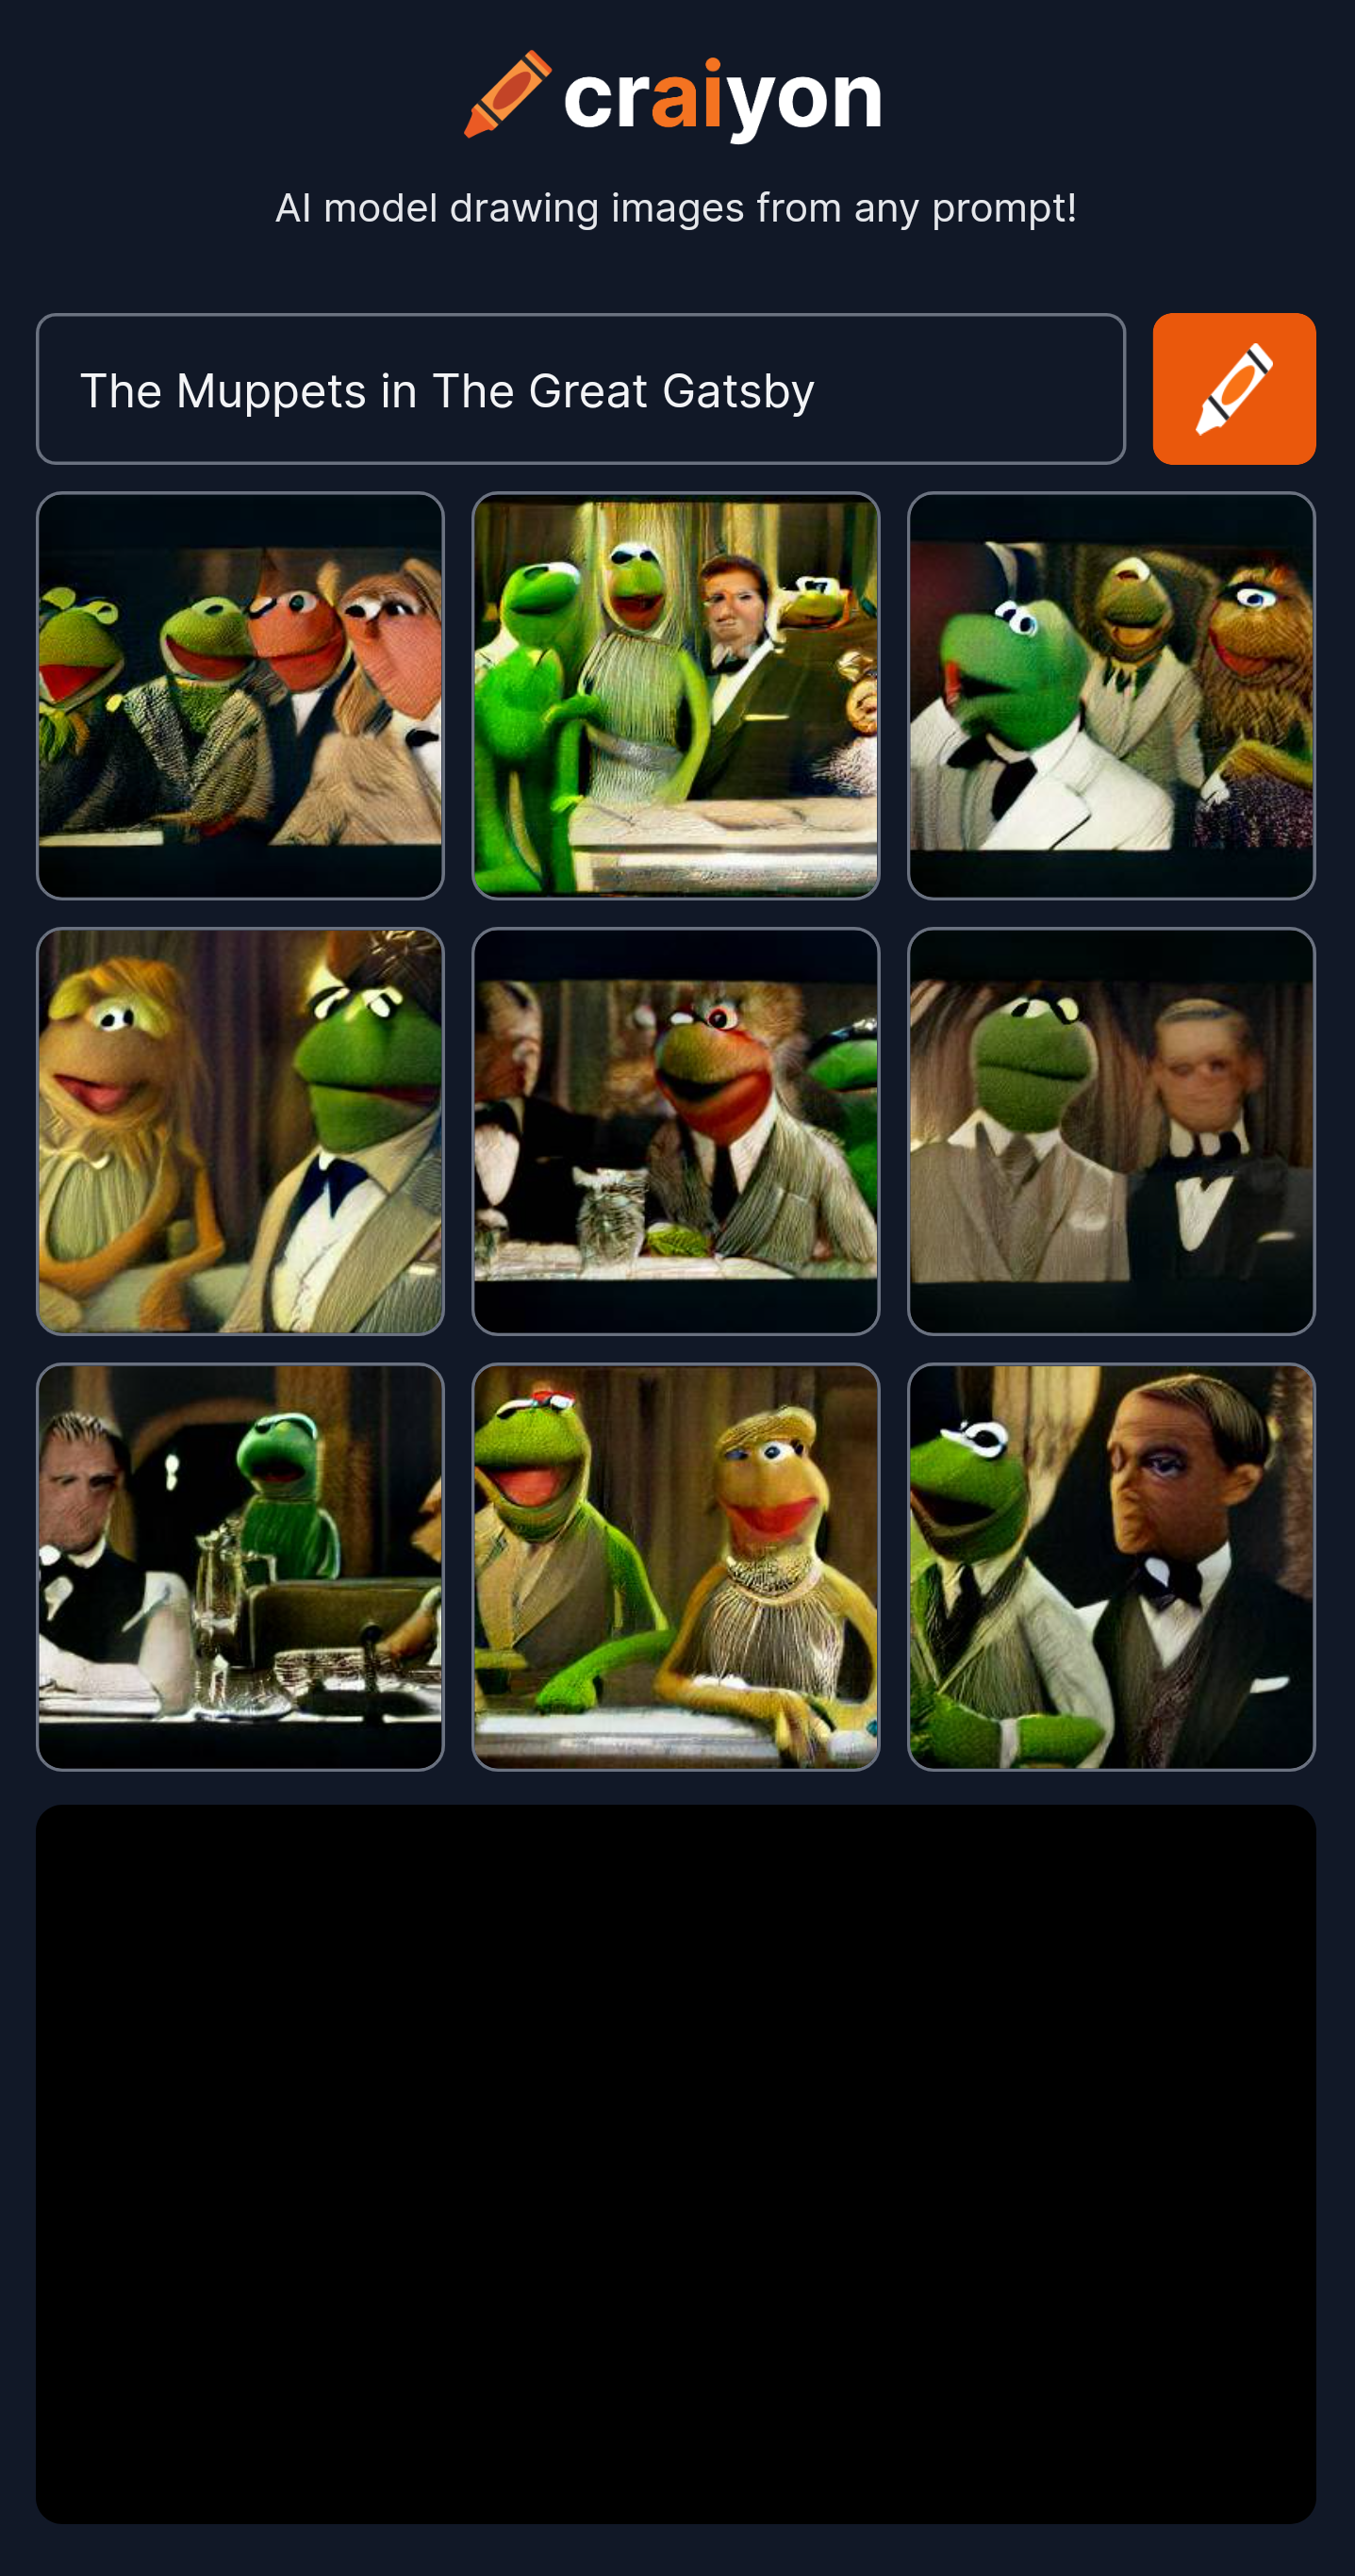 craiyon_222206_The_Muppets_in_The_Great_Gatsby.jpg.png